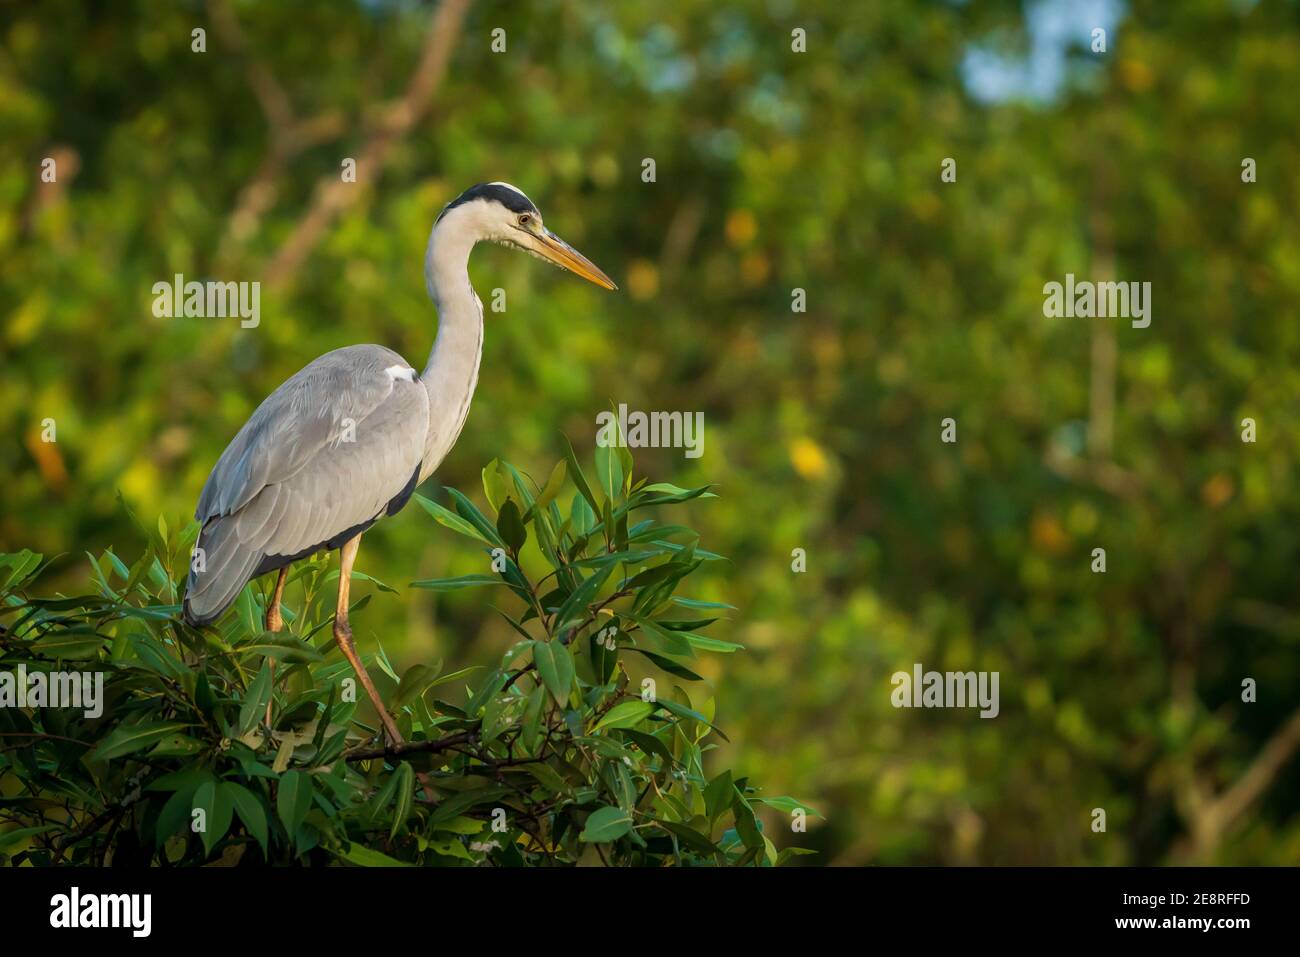 A single grey heron perched high in a tree in the mangrove area of Pasir Ris Park, Singapore Stock Photo